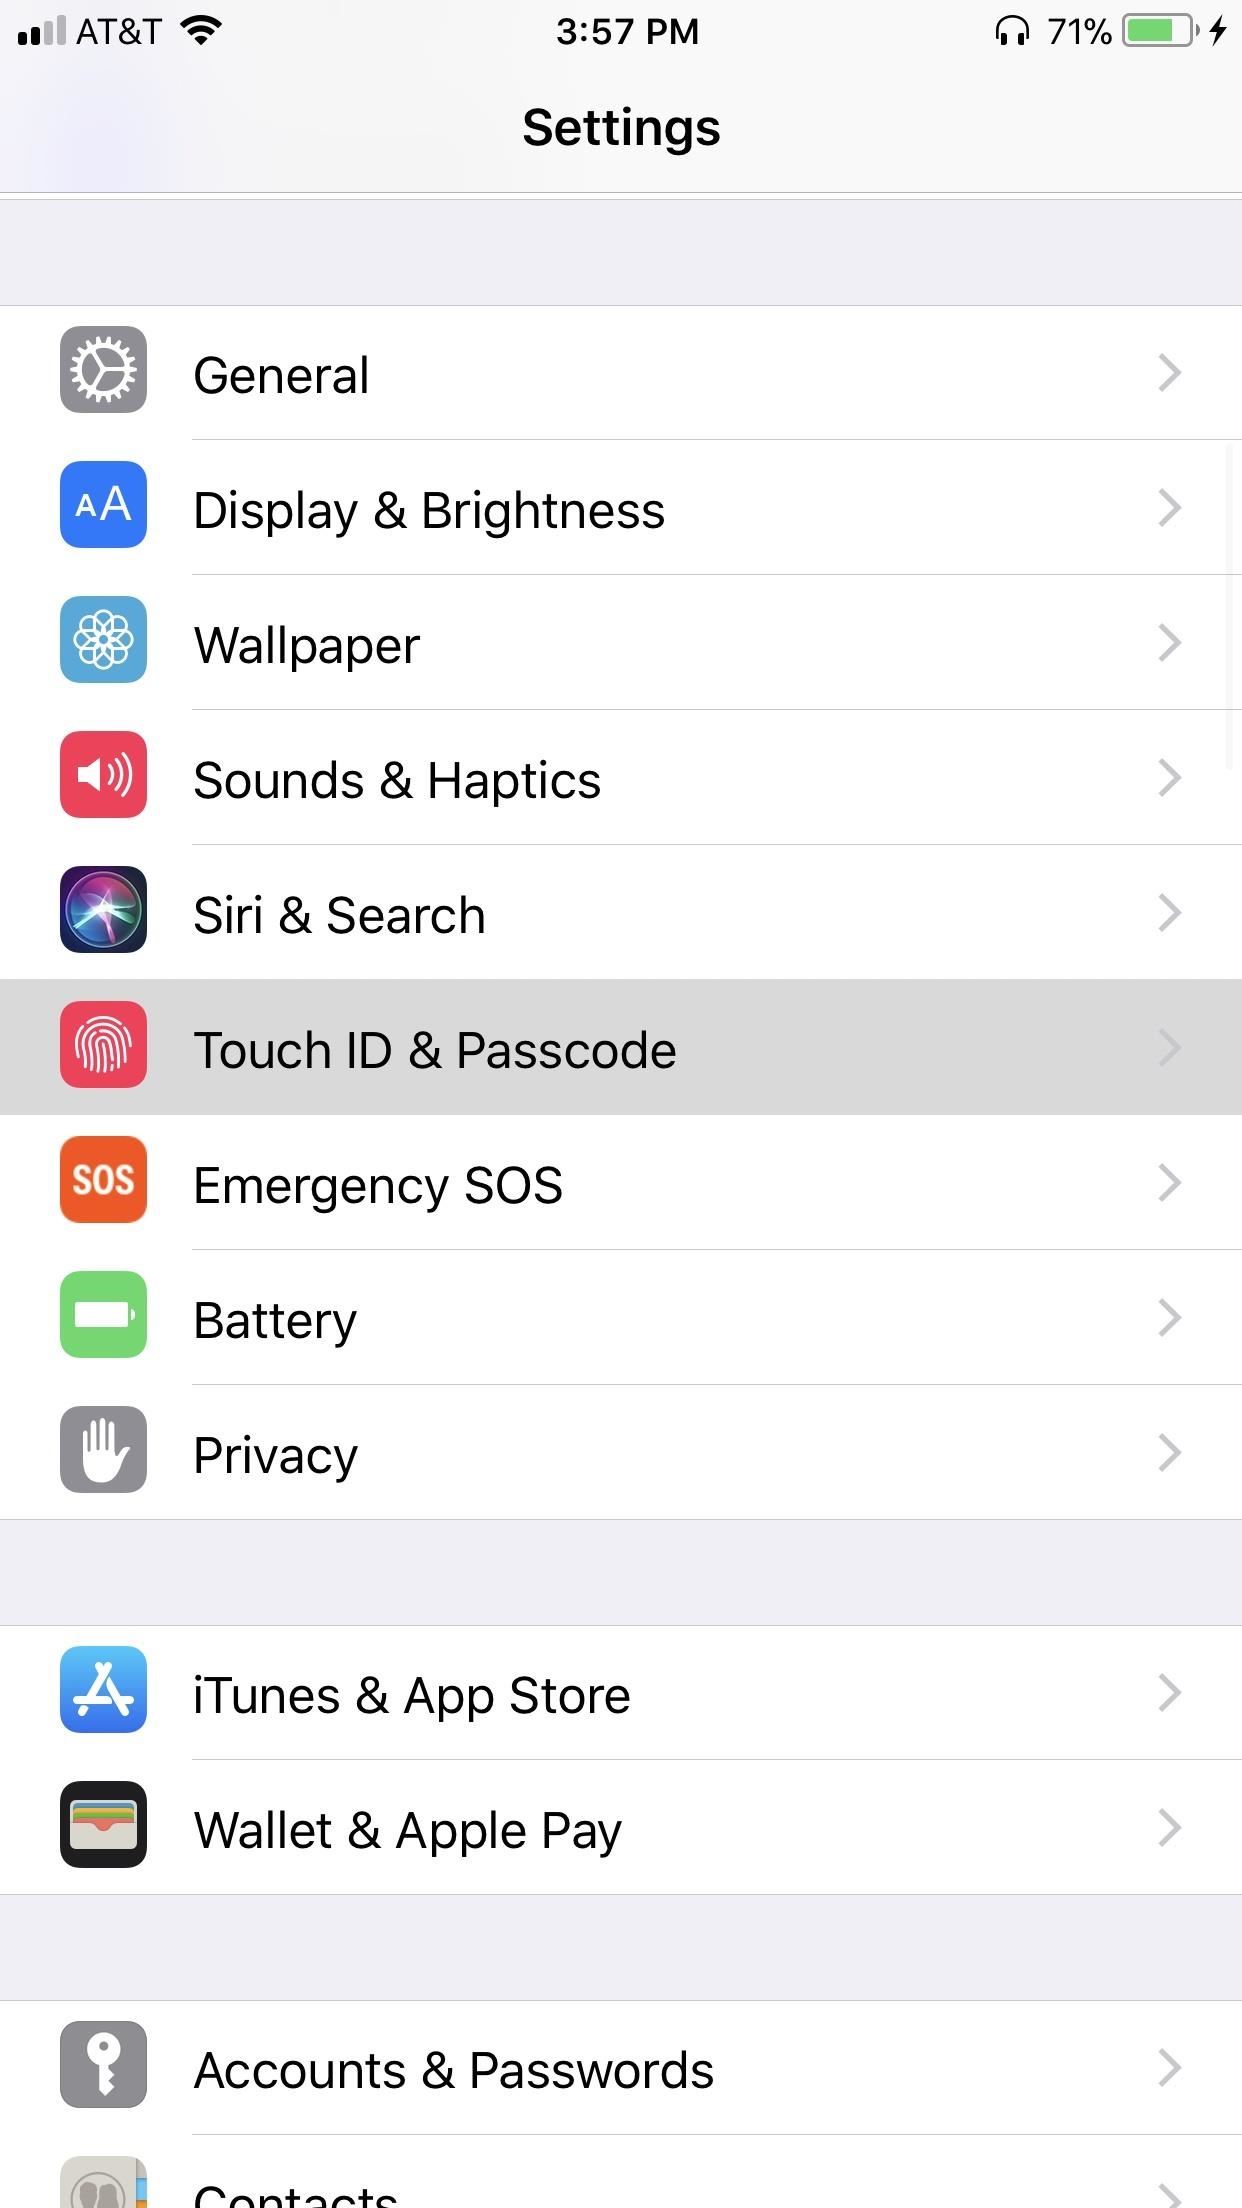 24 iOS 11 Privacy & Security Settings You Should Check Right Now